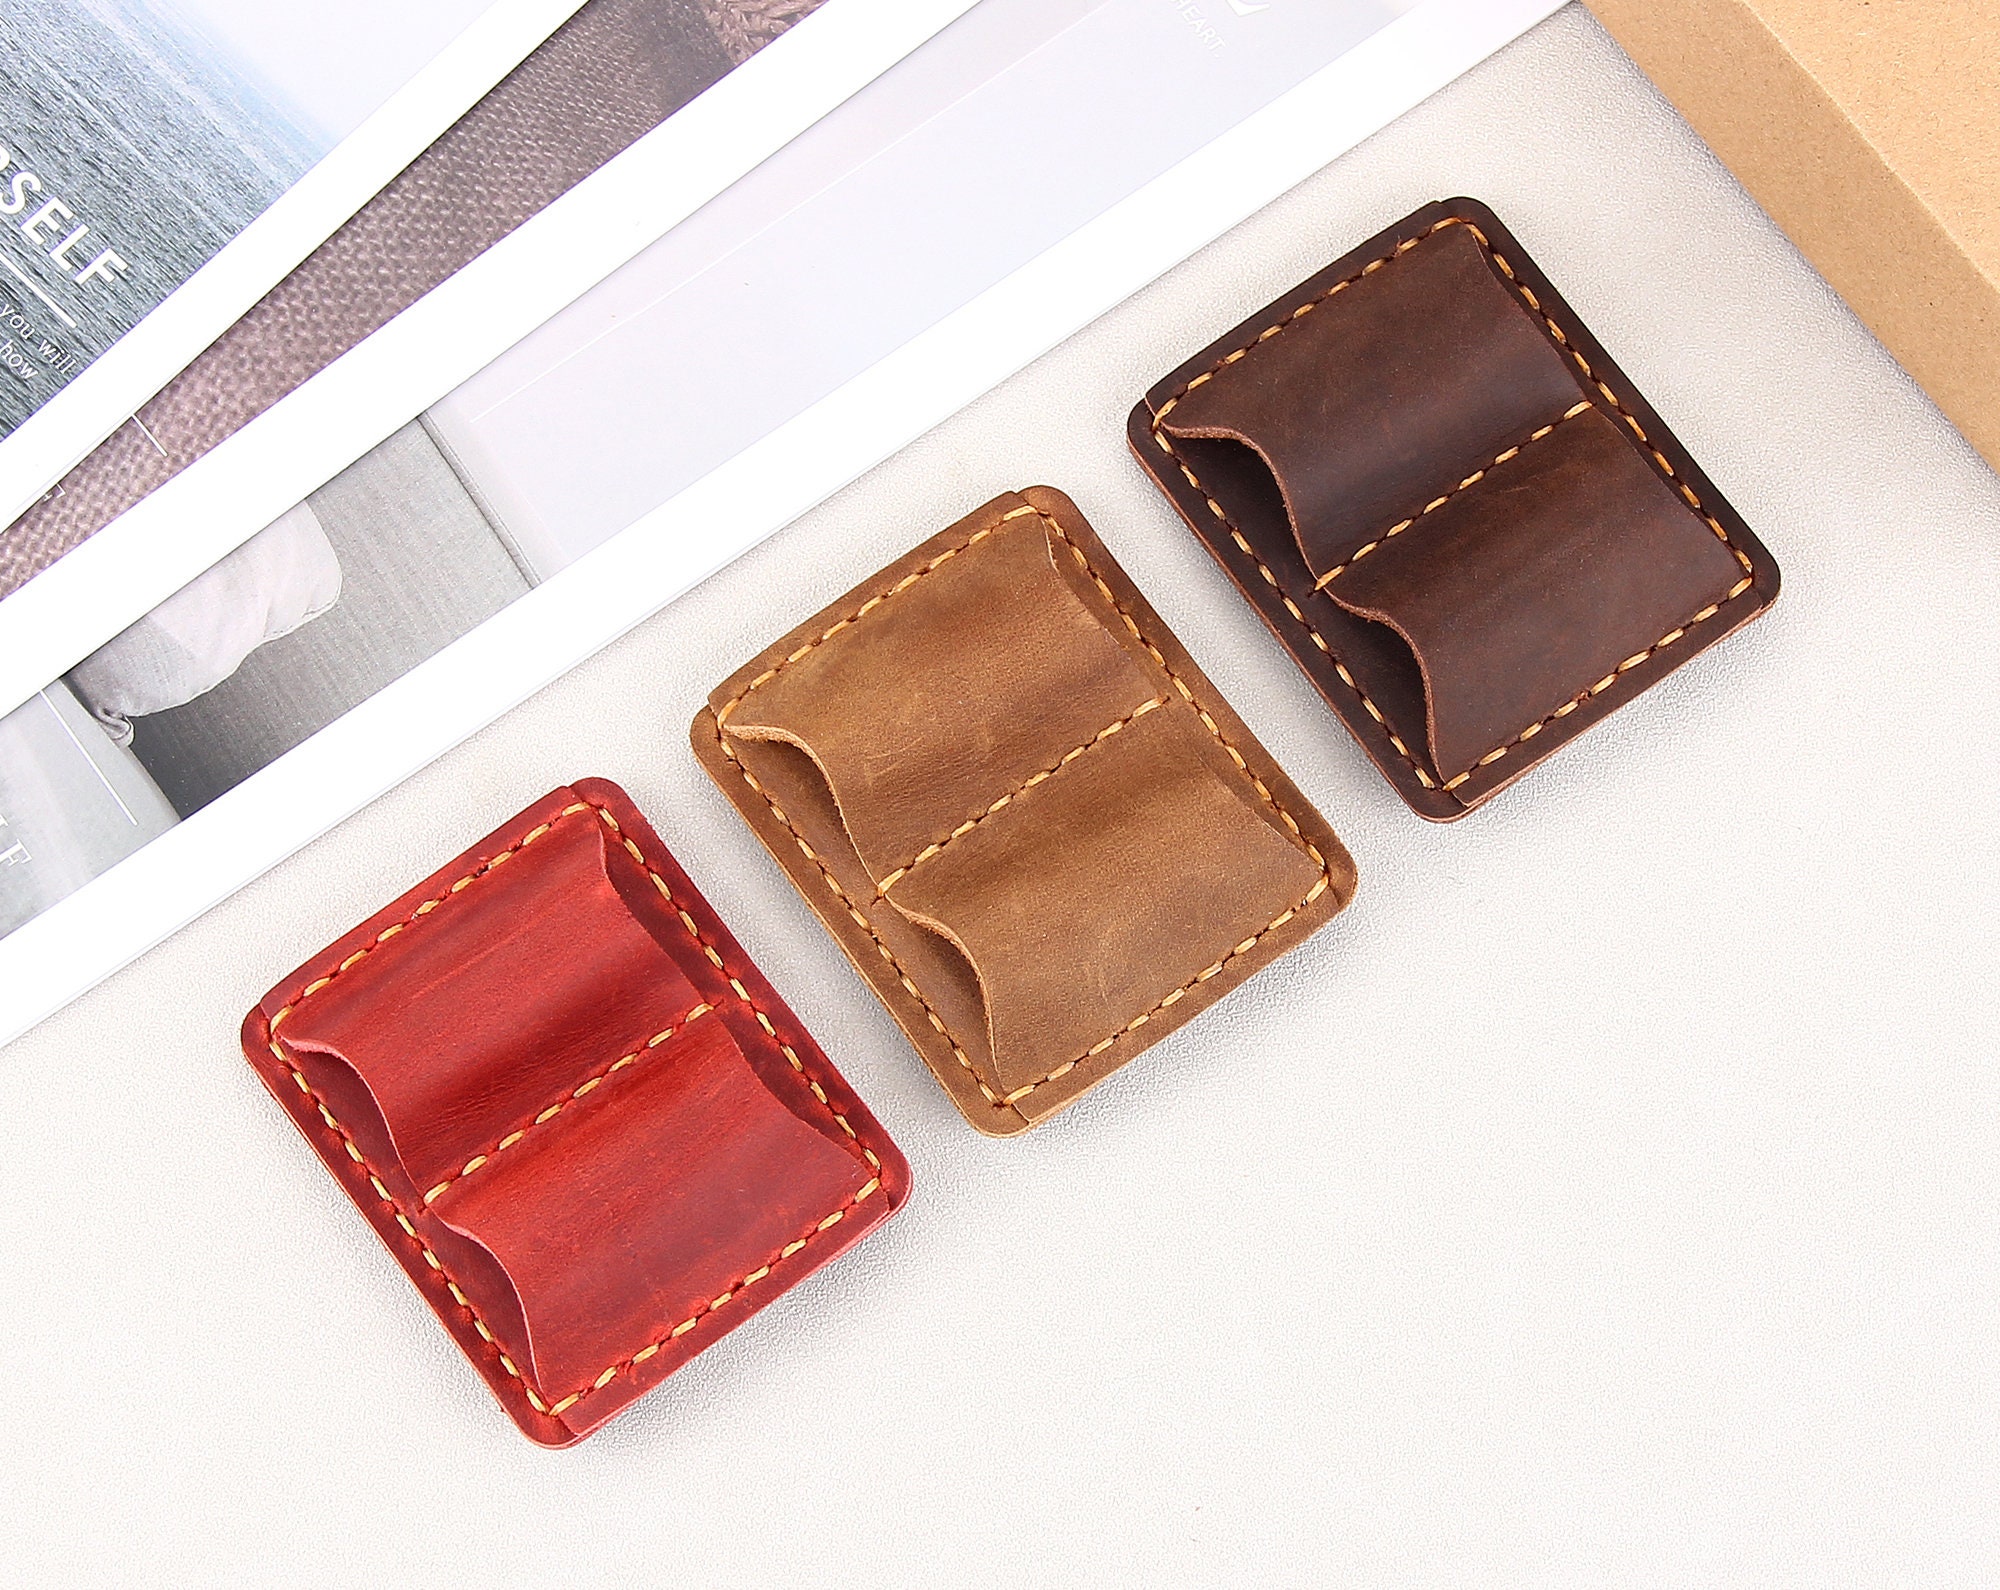 Leather pen pencil holder clip for notebook journal – DMleather